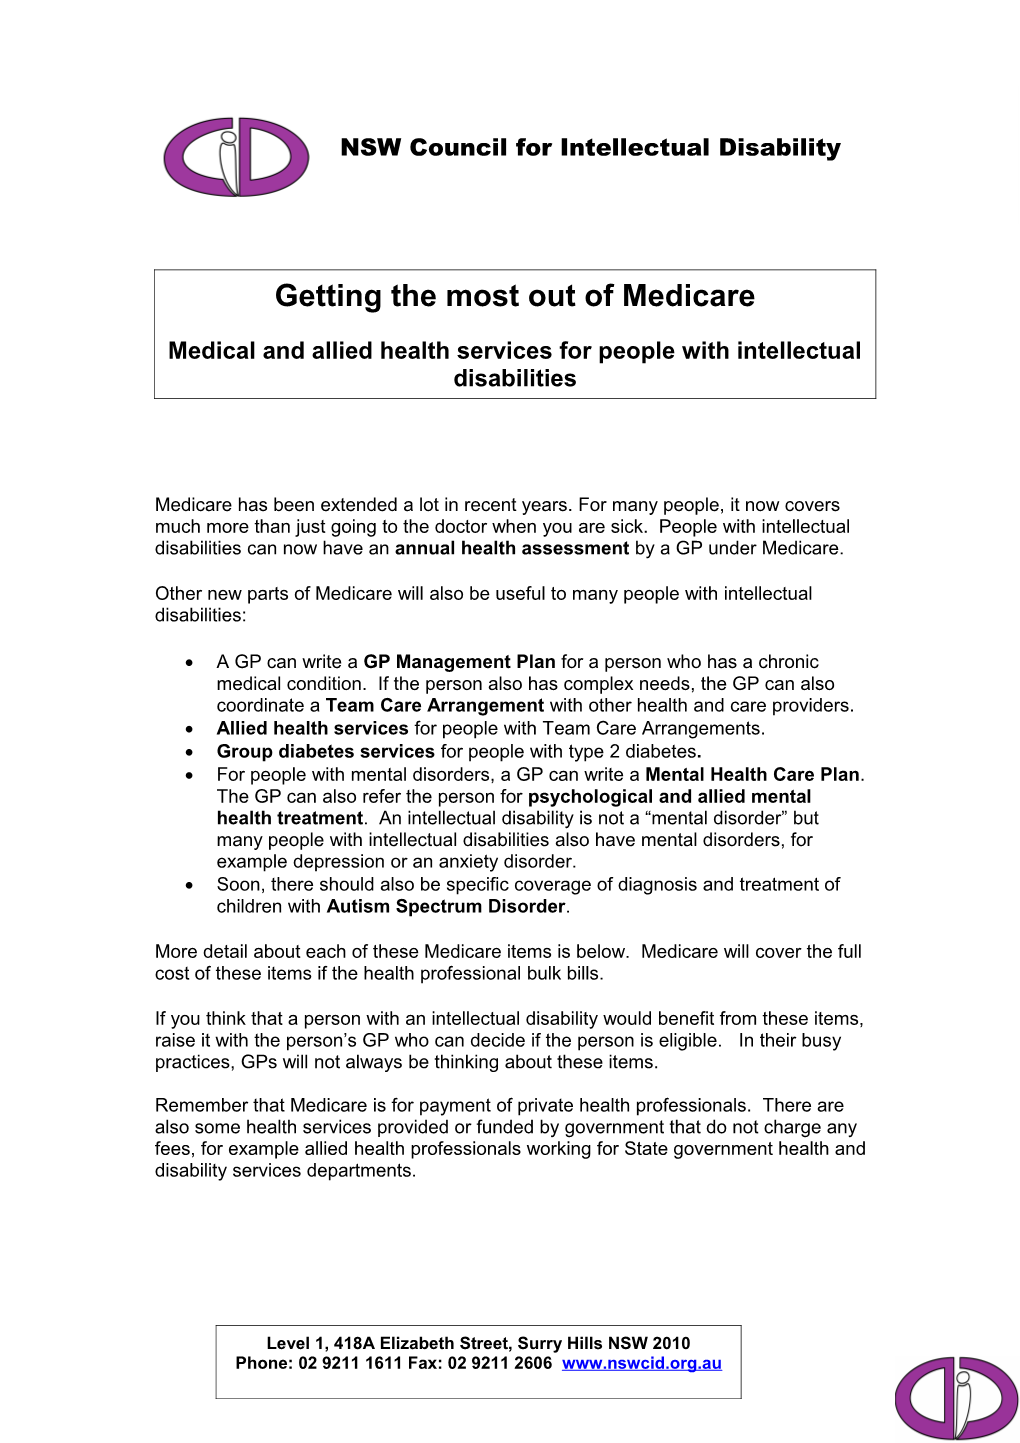 Getting the Most out of Medicare